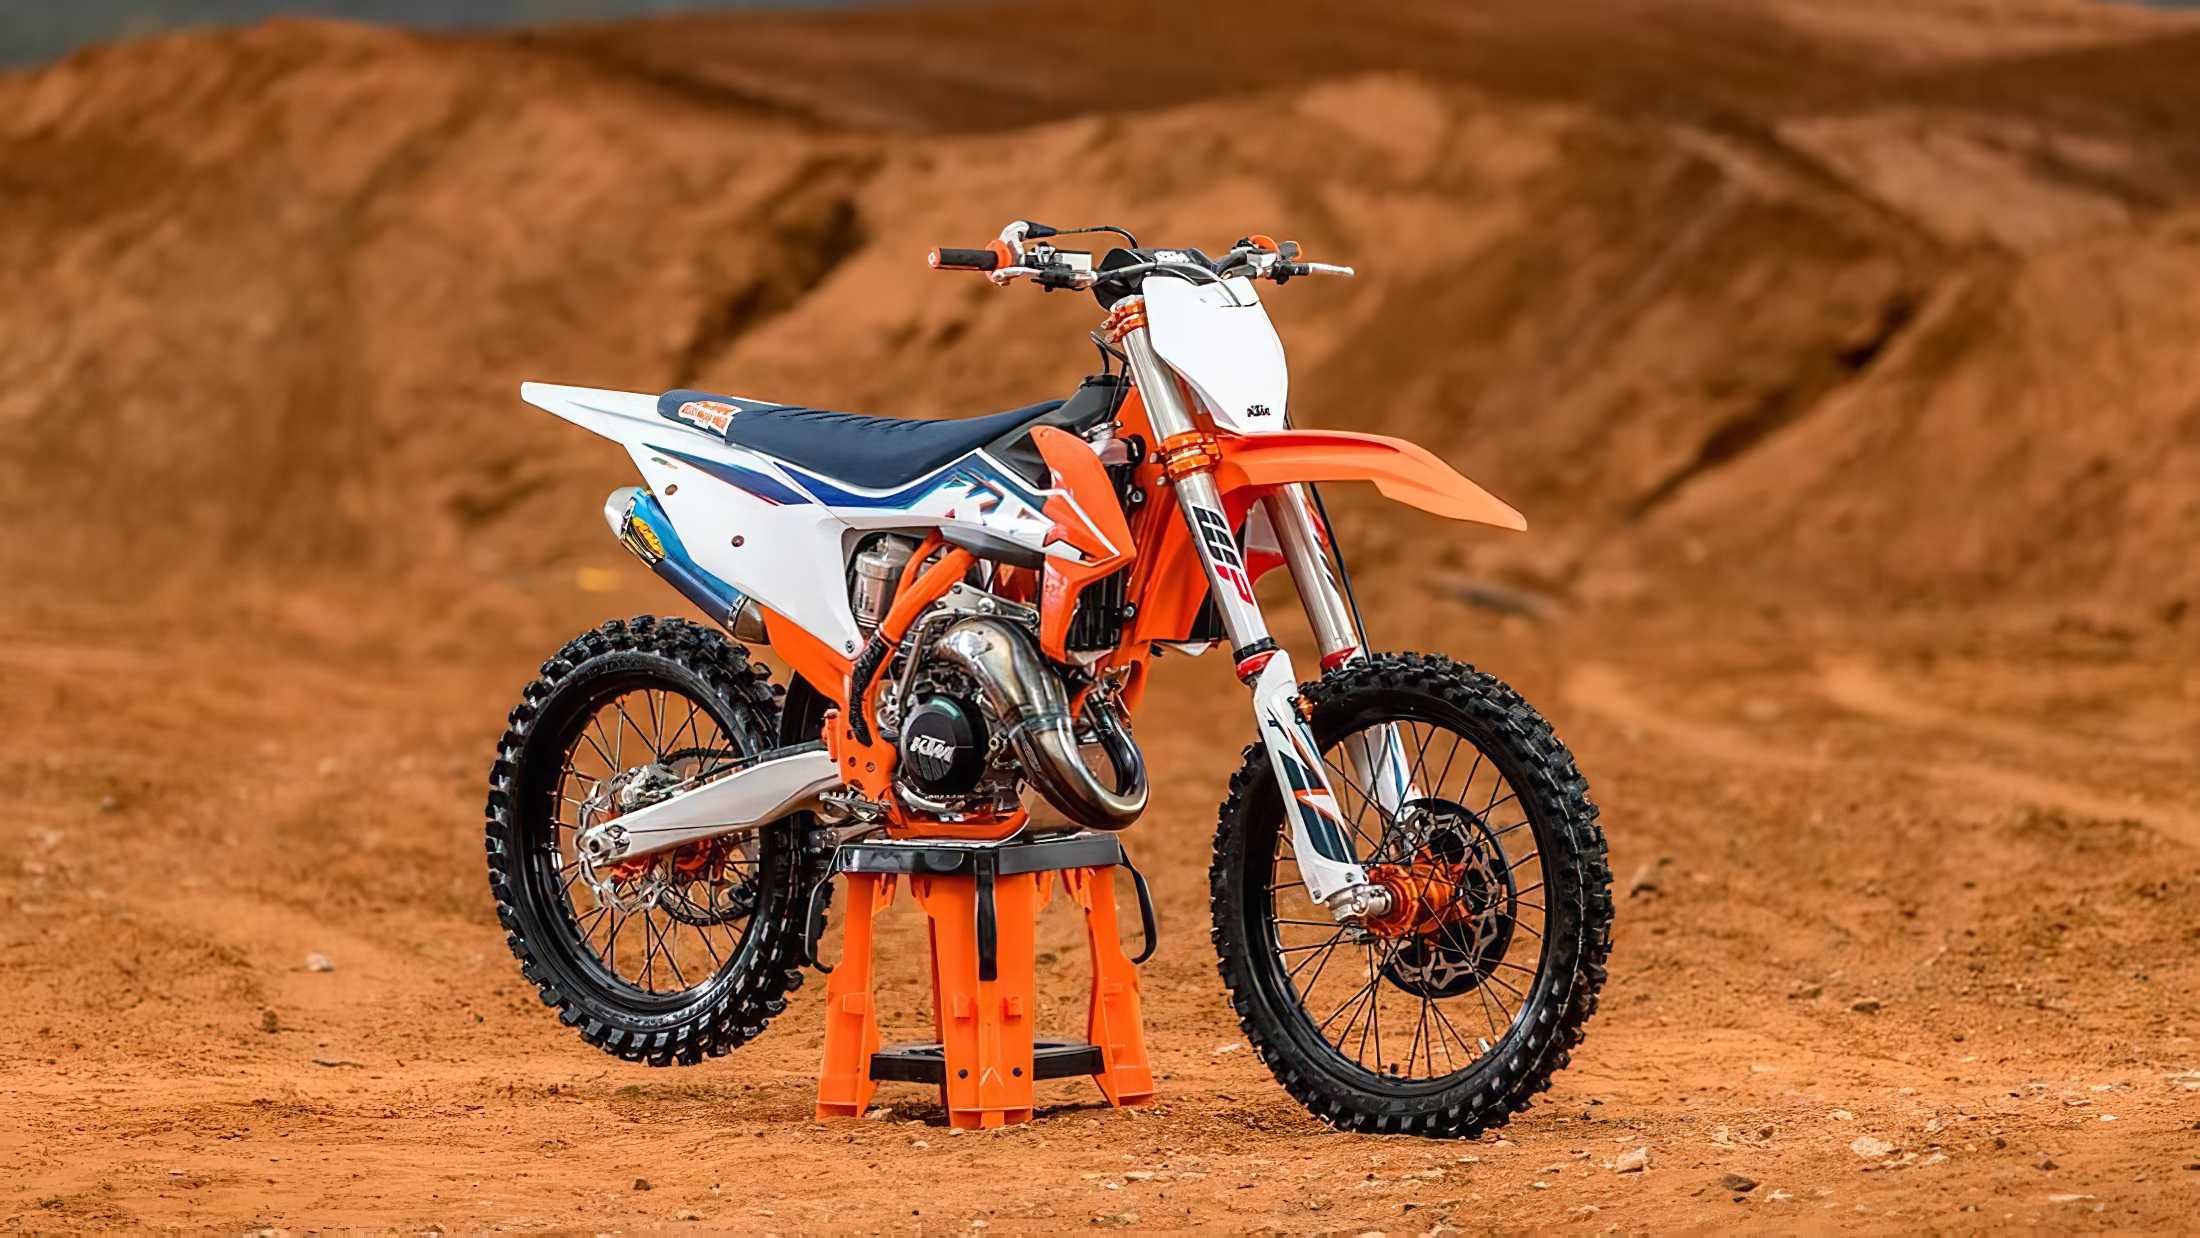 KTM, Husqvarna and GasGas are recalling the 125 2-strokes - MOTORCYCLES.NEWS